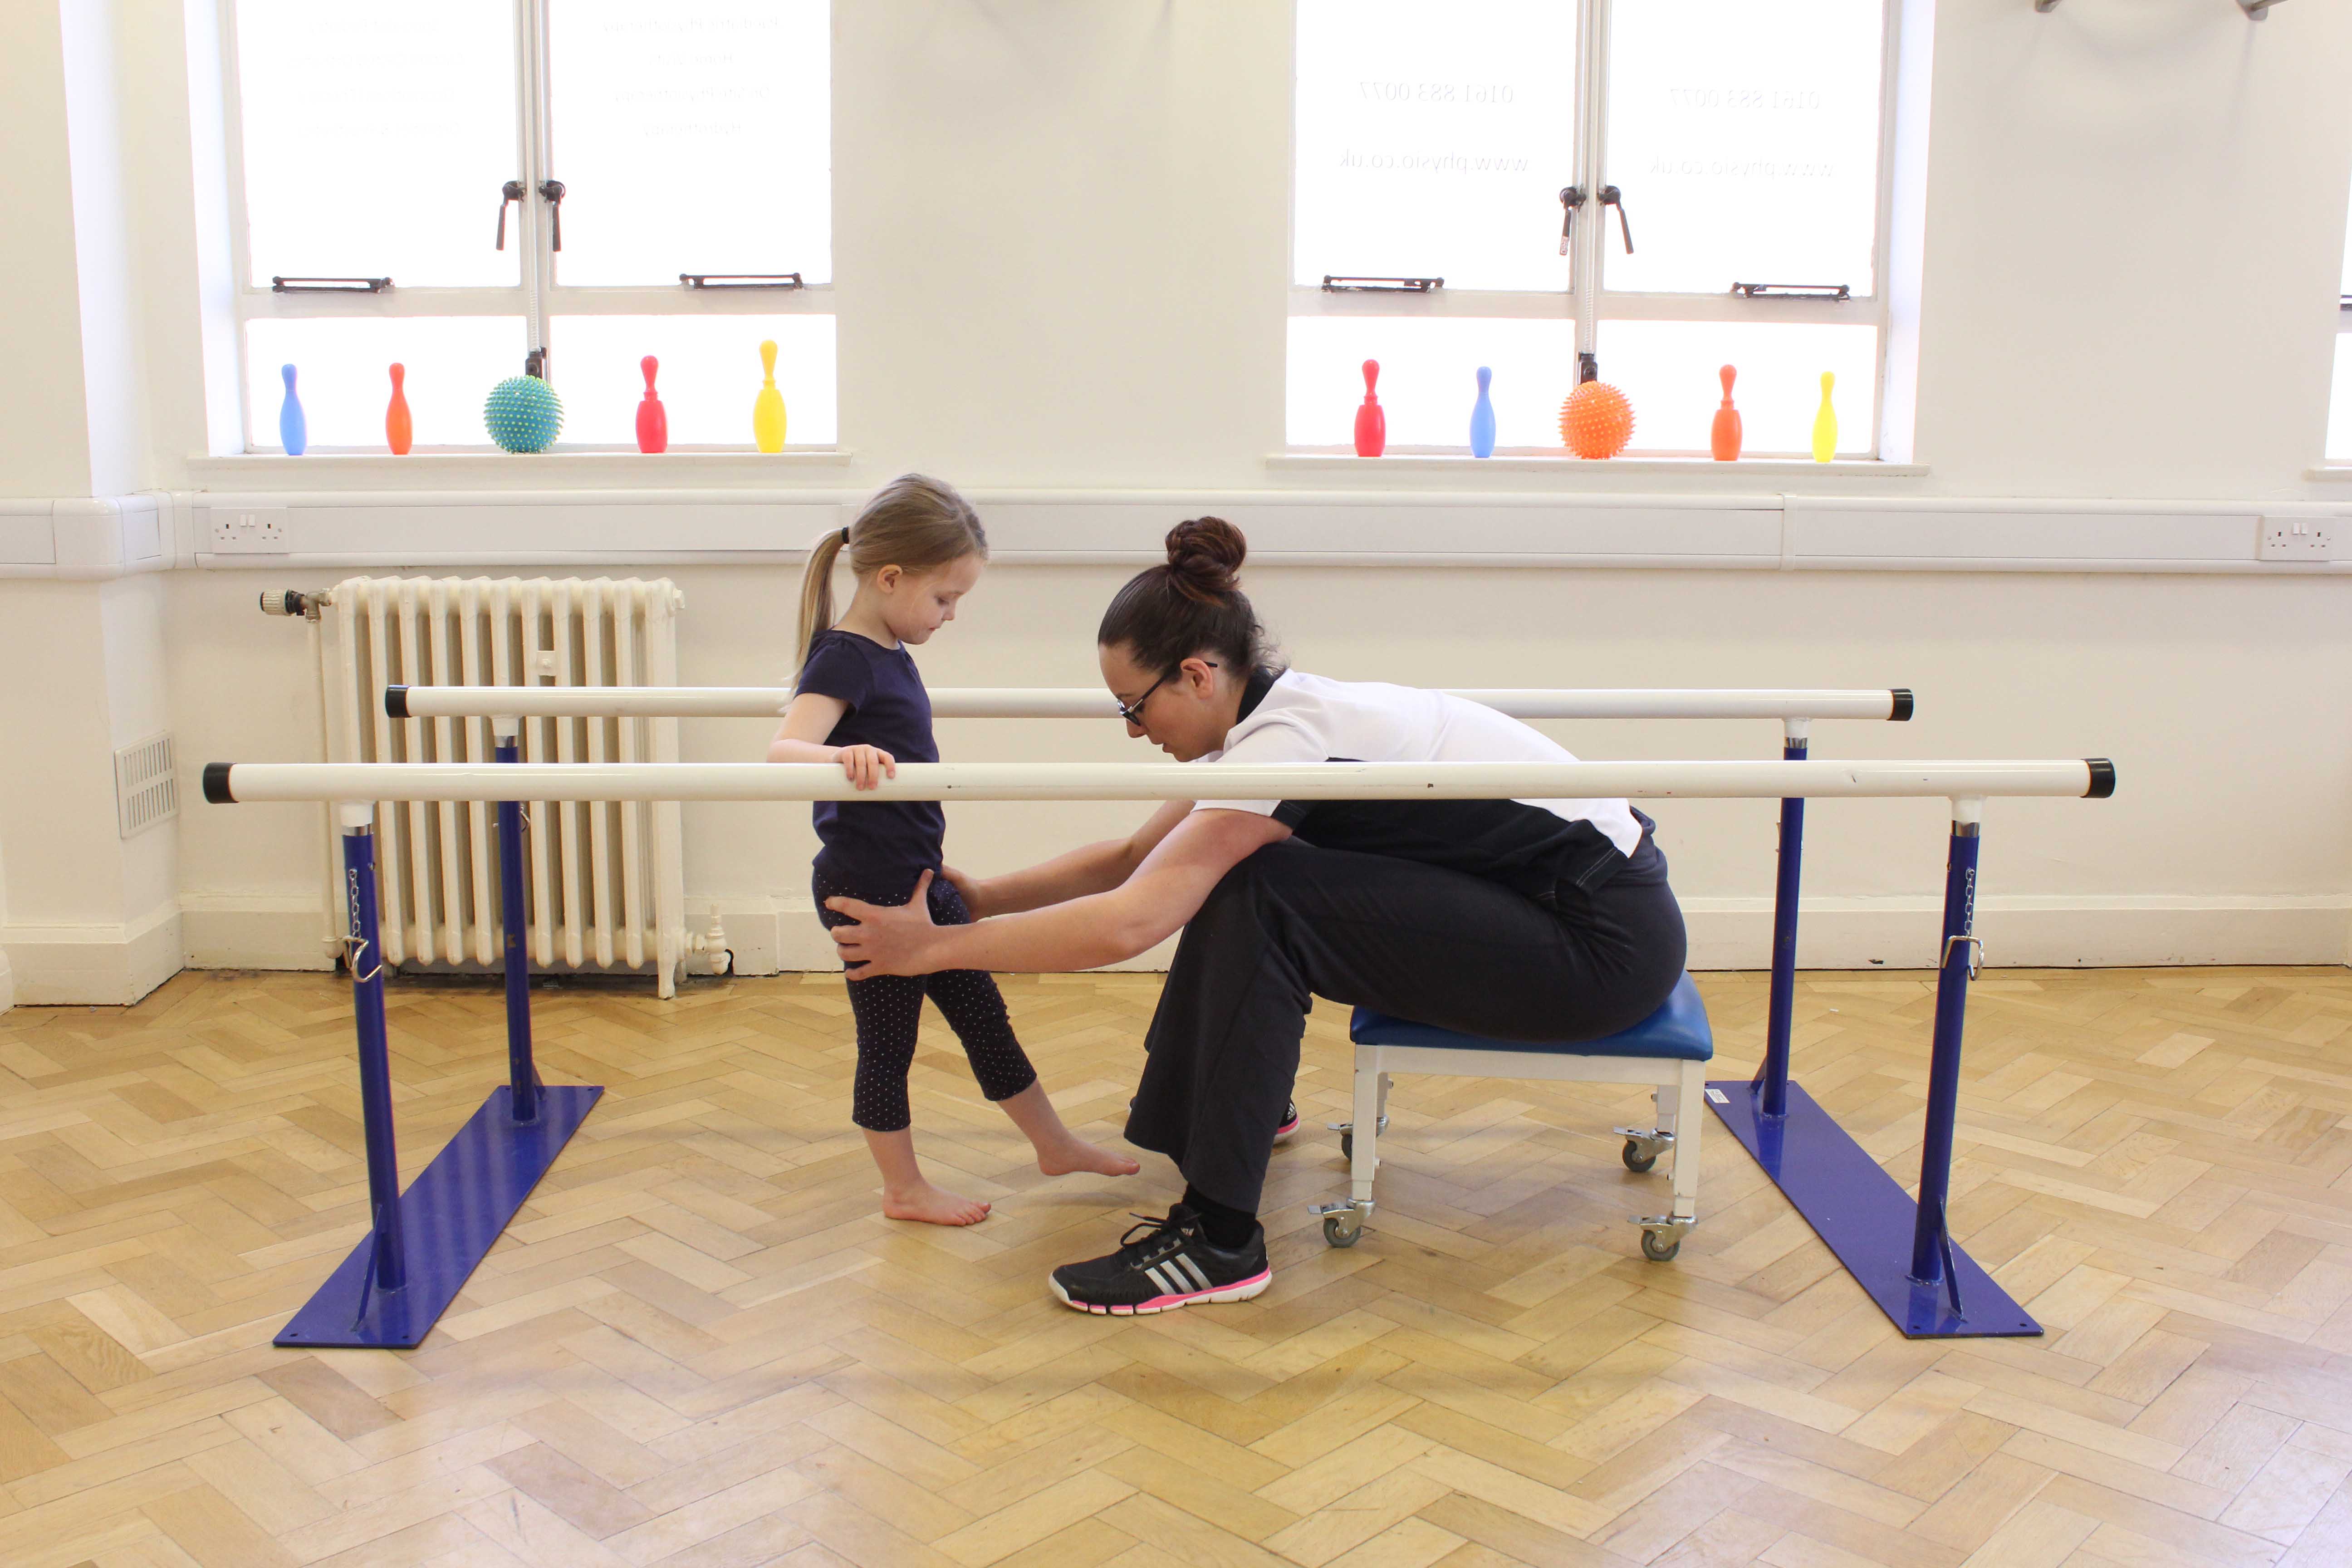 Gait re-education using the parallel bars under close supervision of specilist Paediatric Physiotherapist